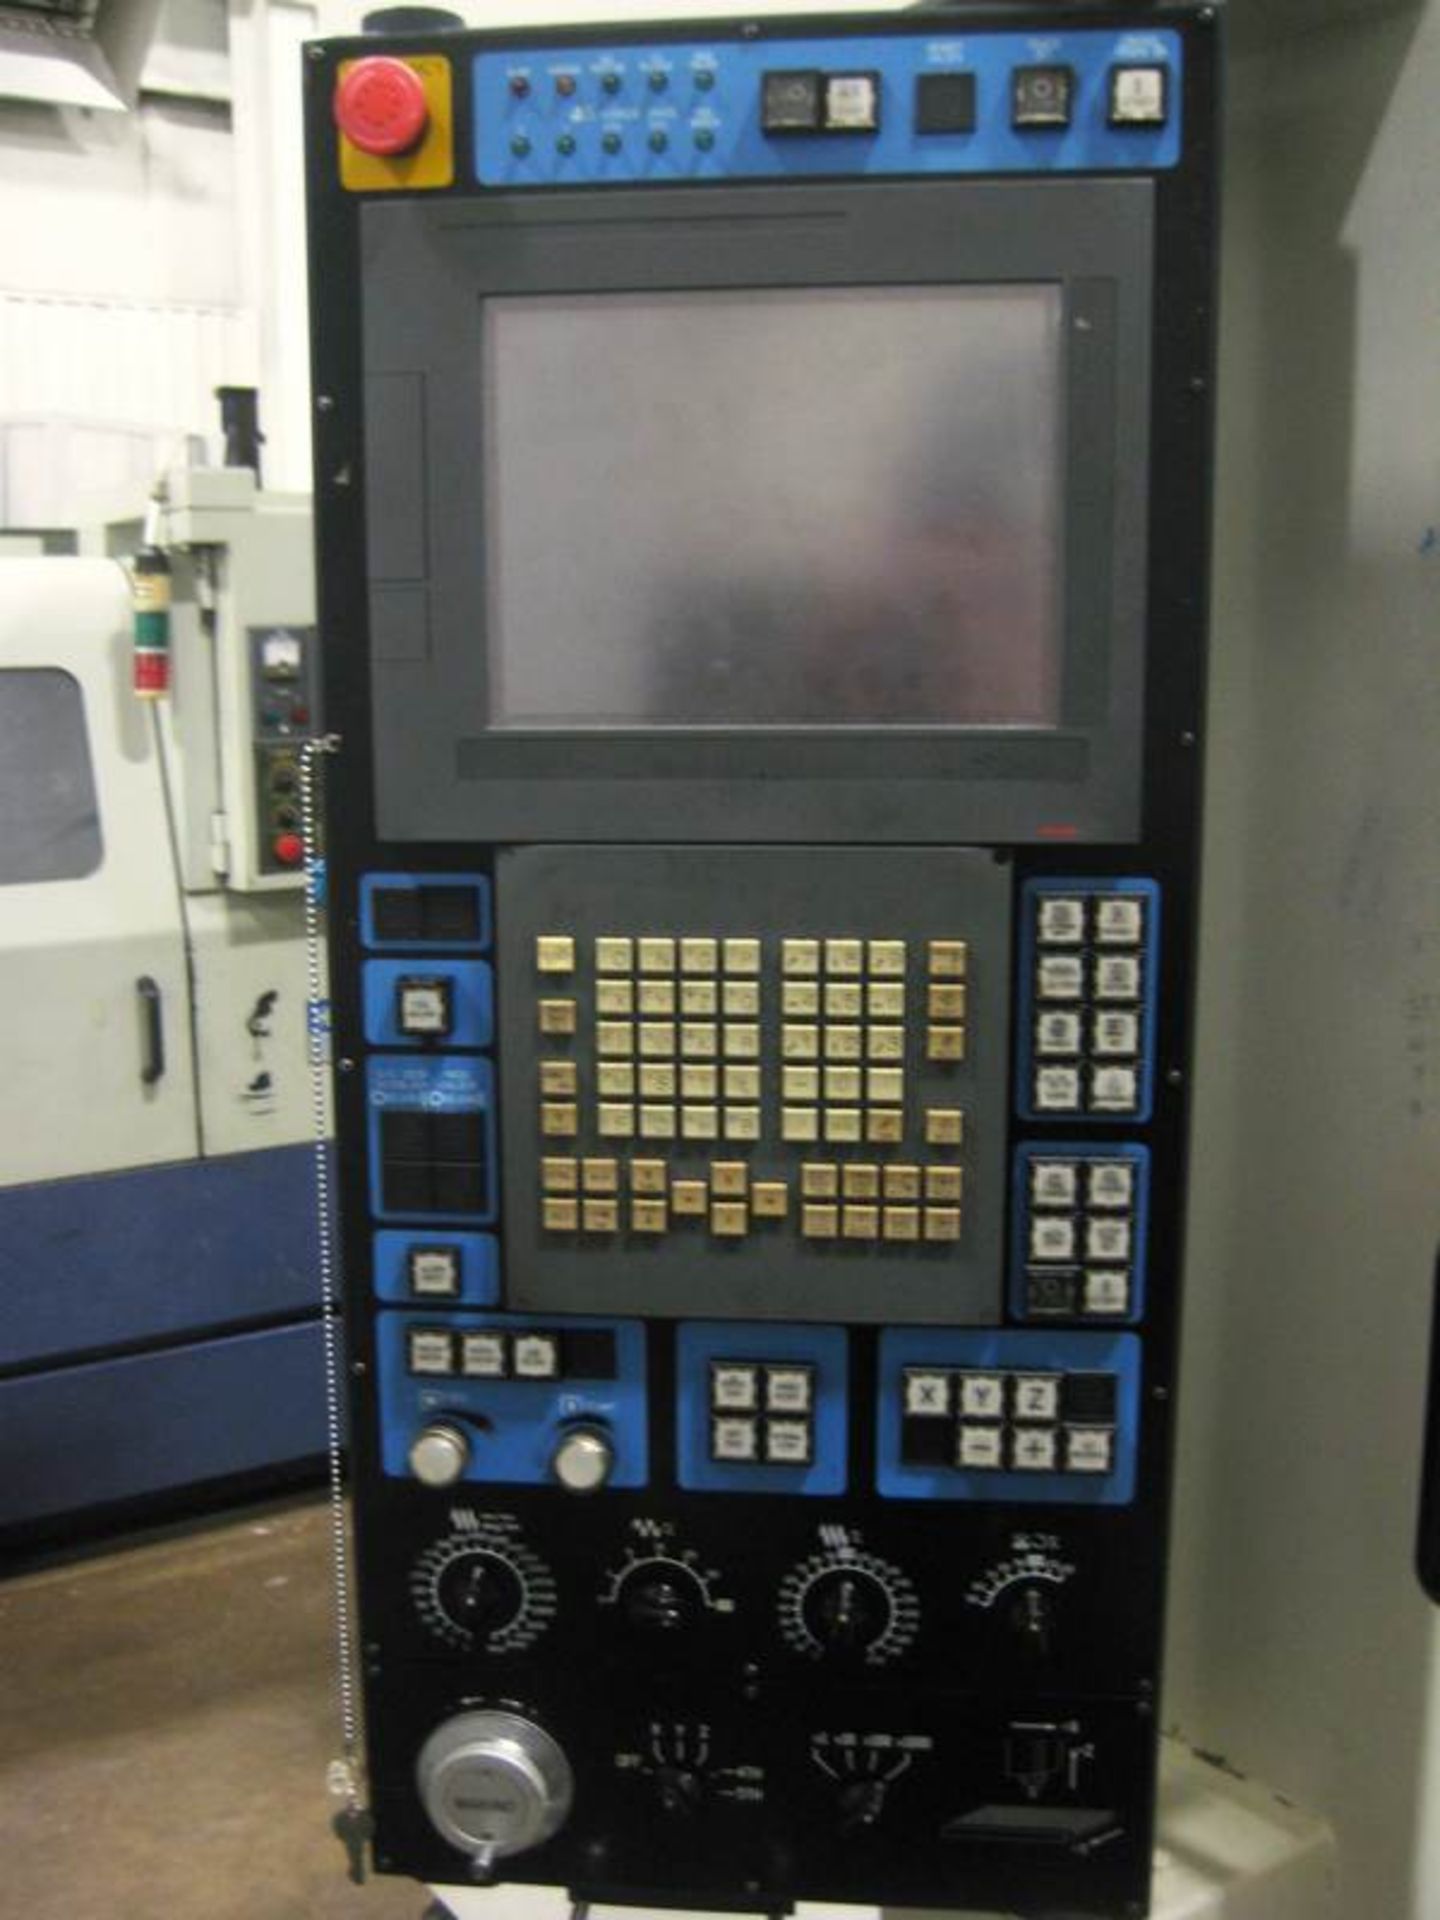 Makino S33-APC 3-Axis PRecision CNC Vertical Machining Center with Pallet Changer, S/N V100144, - Image 2 of 15